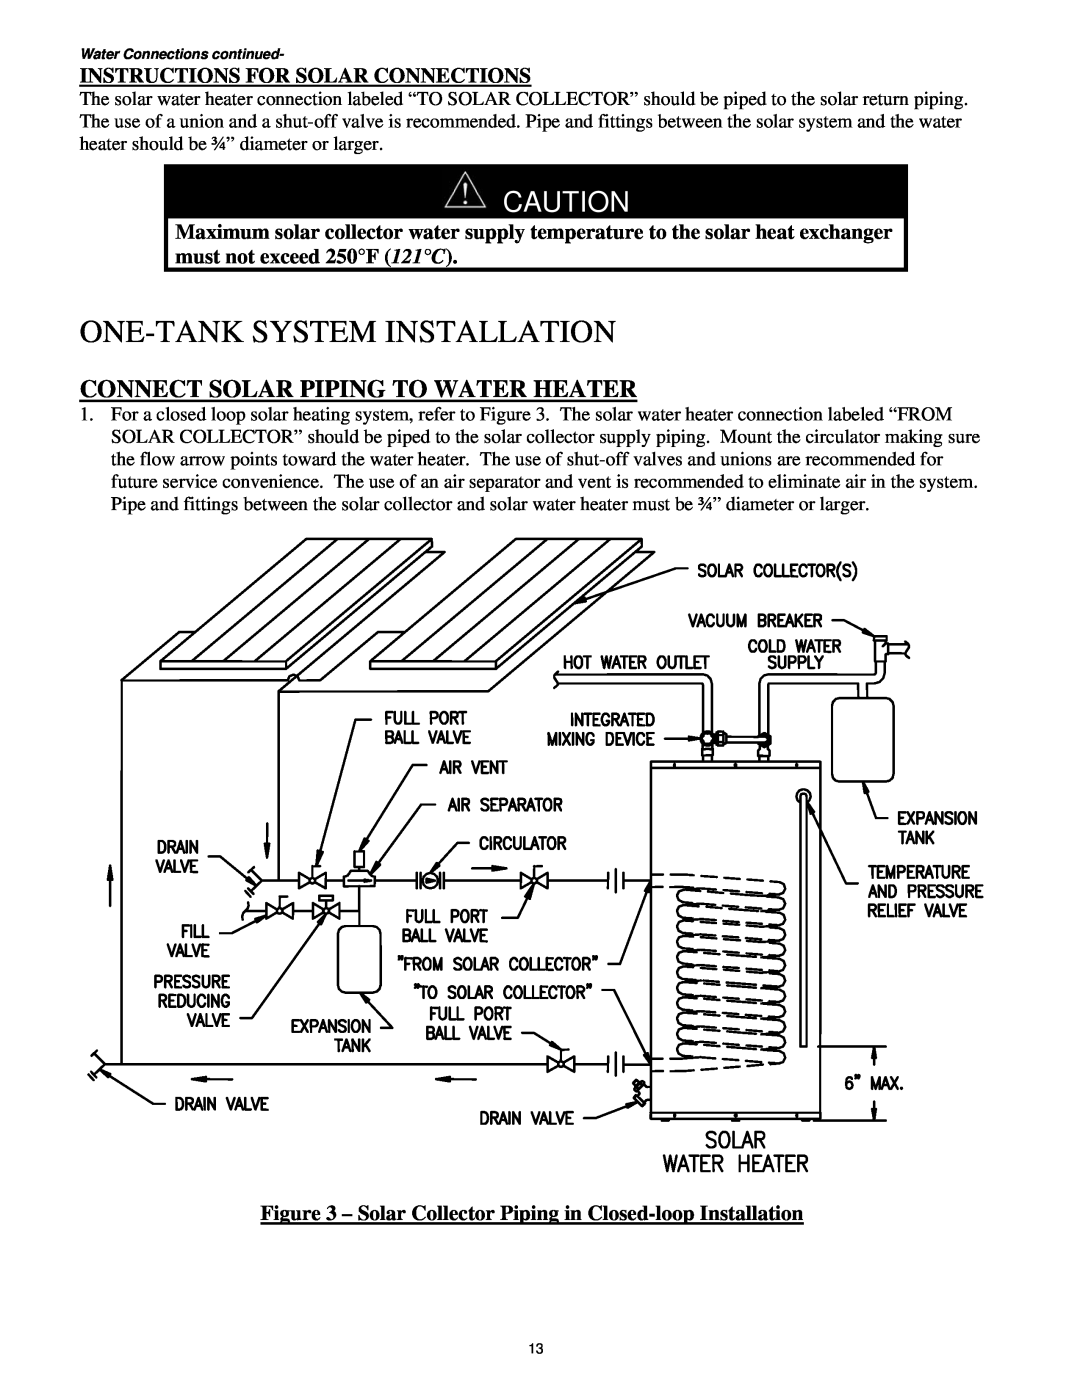 Bradford-White Corp Solar Water Heater manual One-Tank System Installation, Connect Solar Piping To Water Heater 